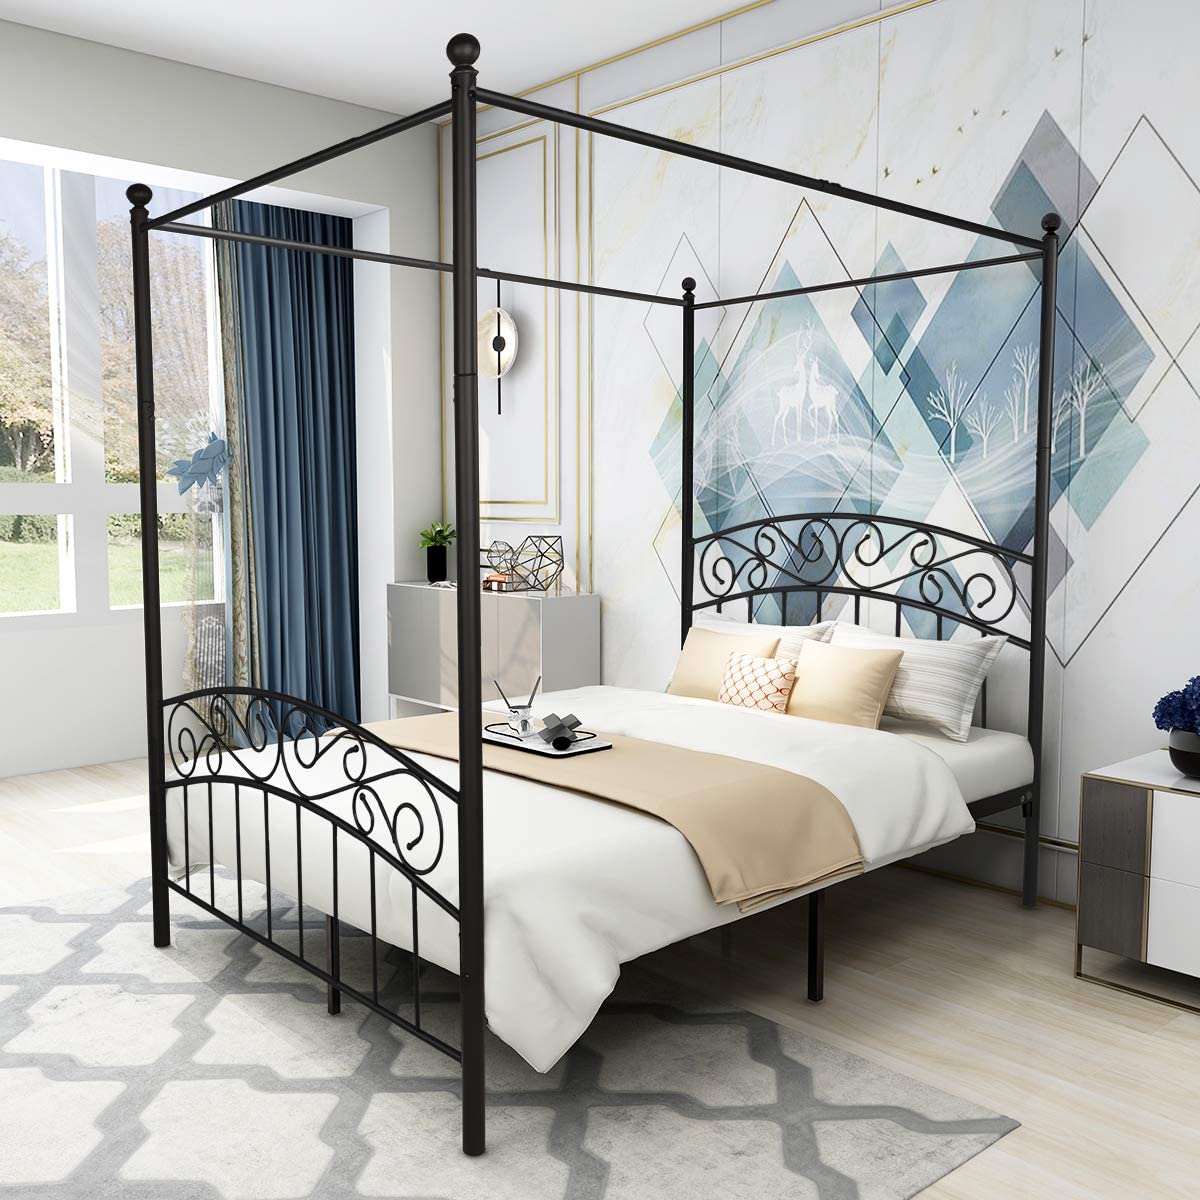 Jurmerry Canopy Bed Frame